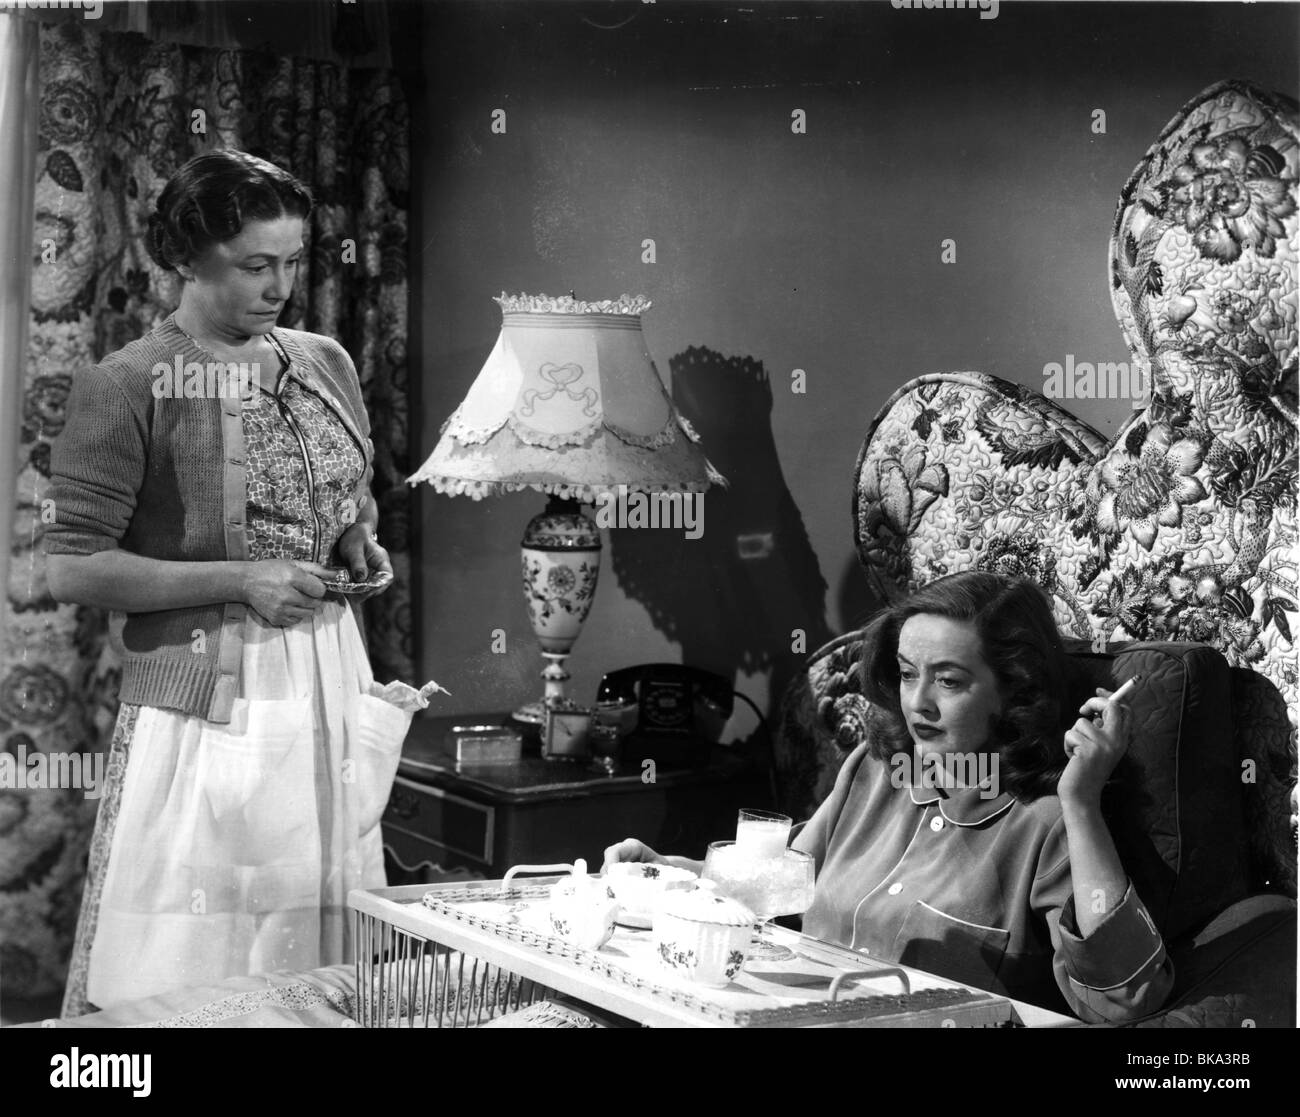 ALL ABOUT EVE (1950) THELMA RITTER, BETTE DAVIS AAE 011P Foto Stock